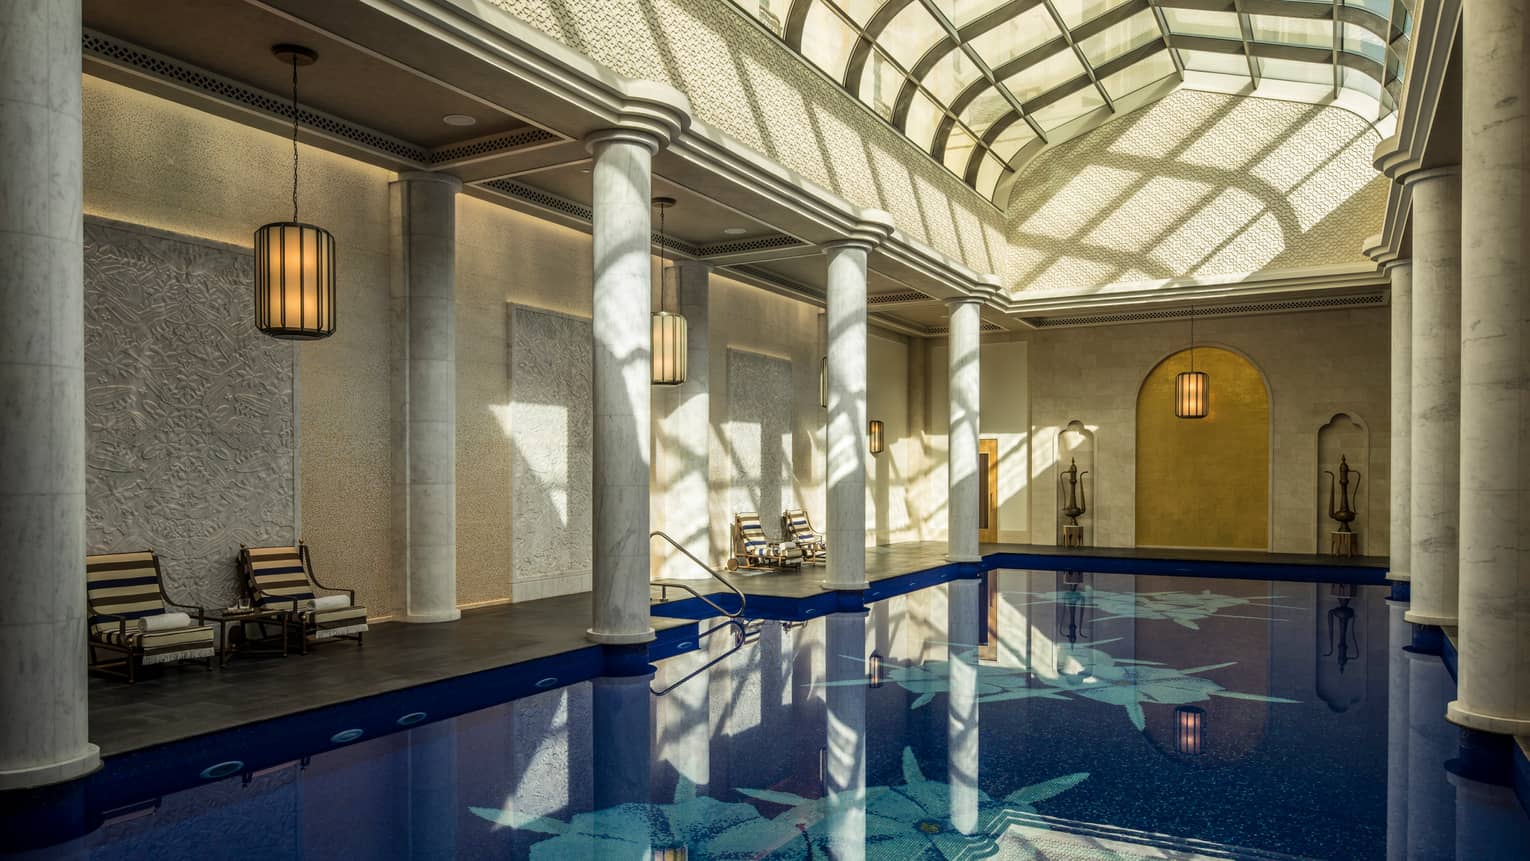 Long indoor swimming pool under curved skylights and tall white pillar columns